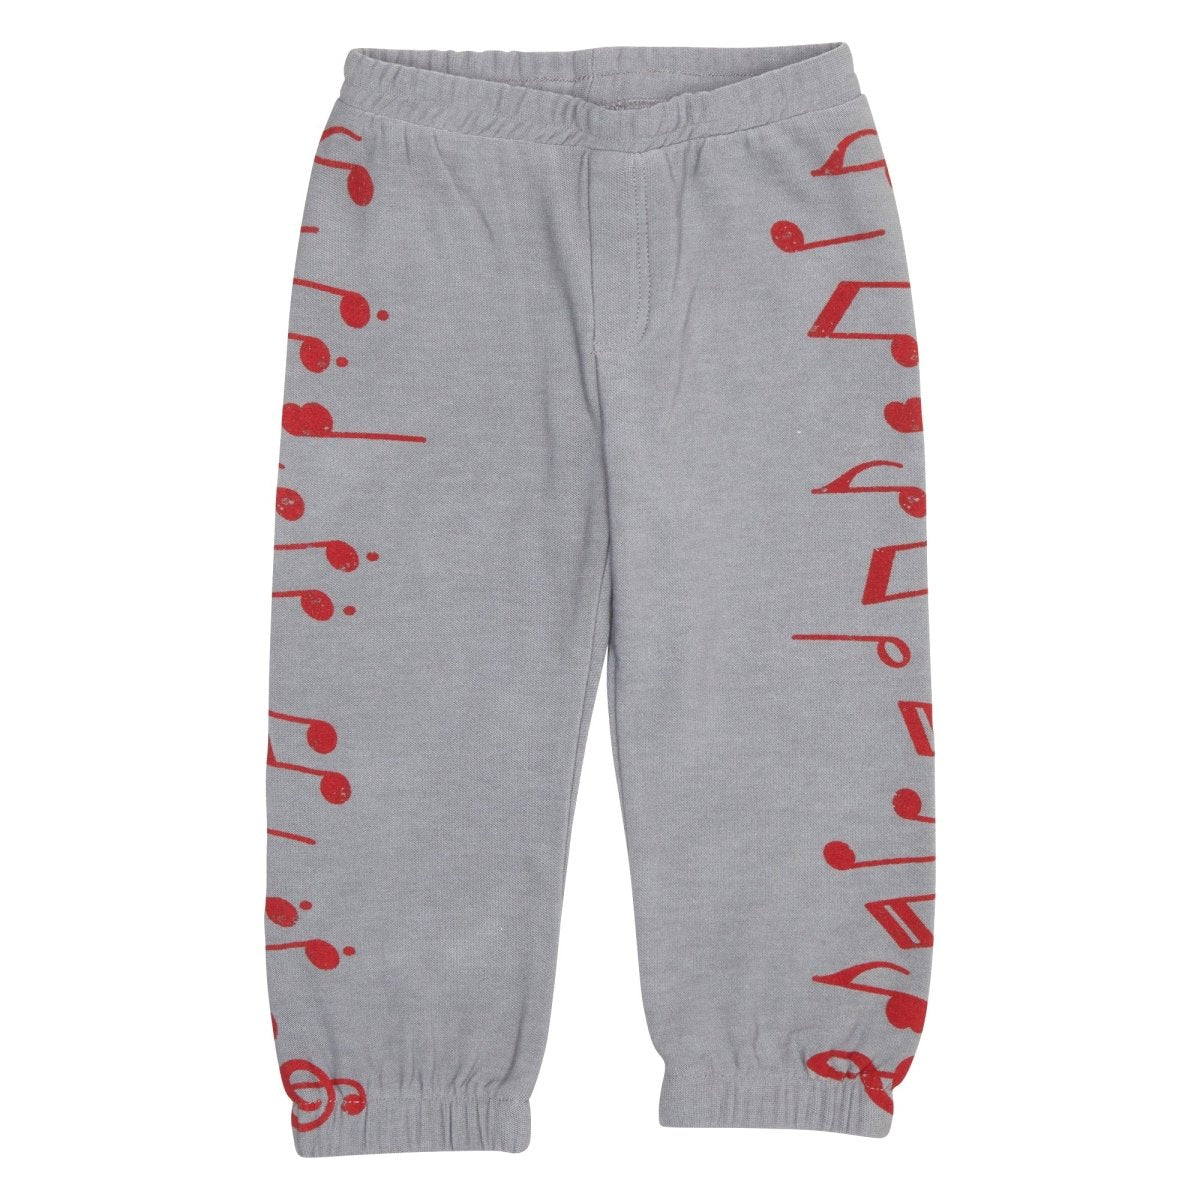 MUSIC NOTES SWEATPANTS - CHASER KIDS